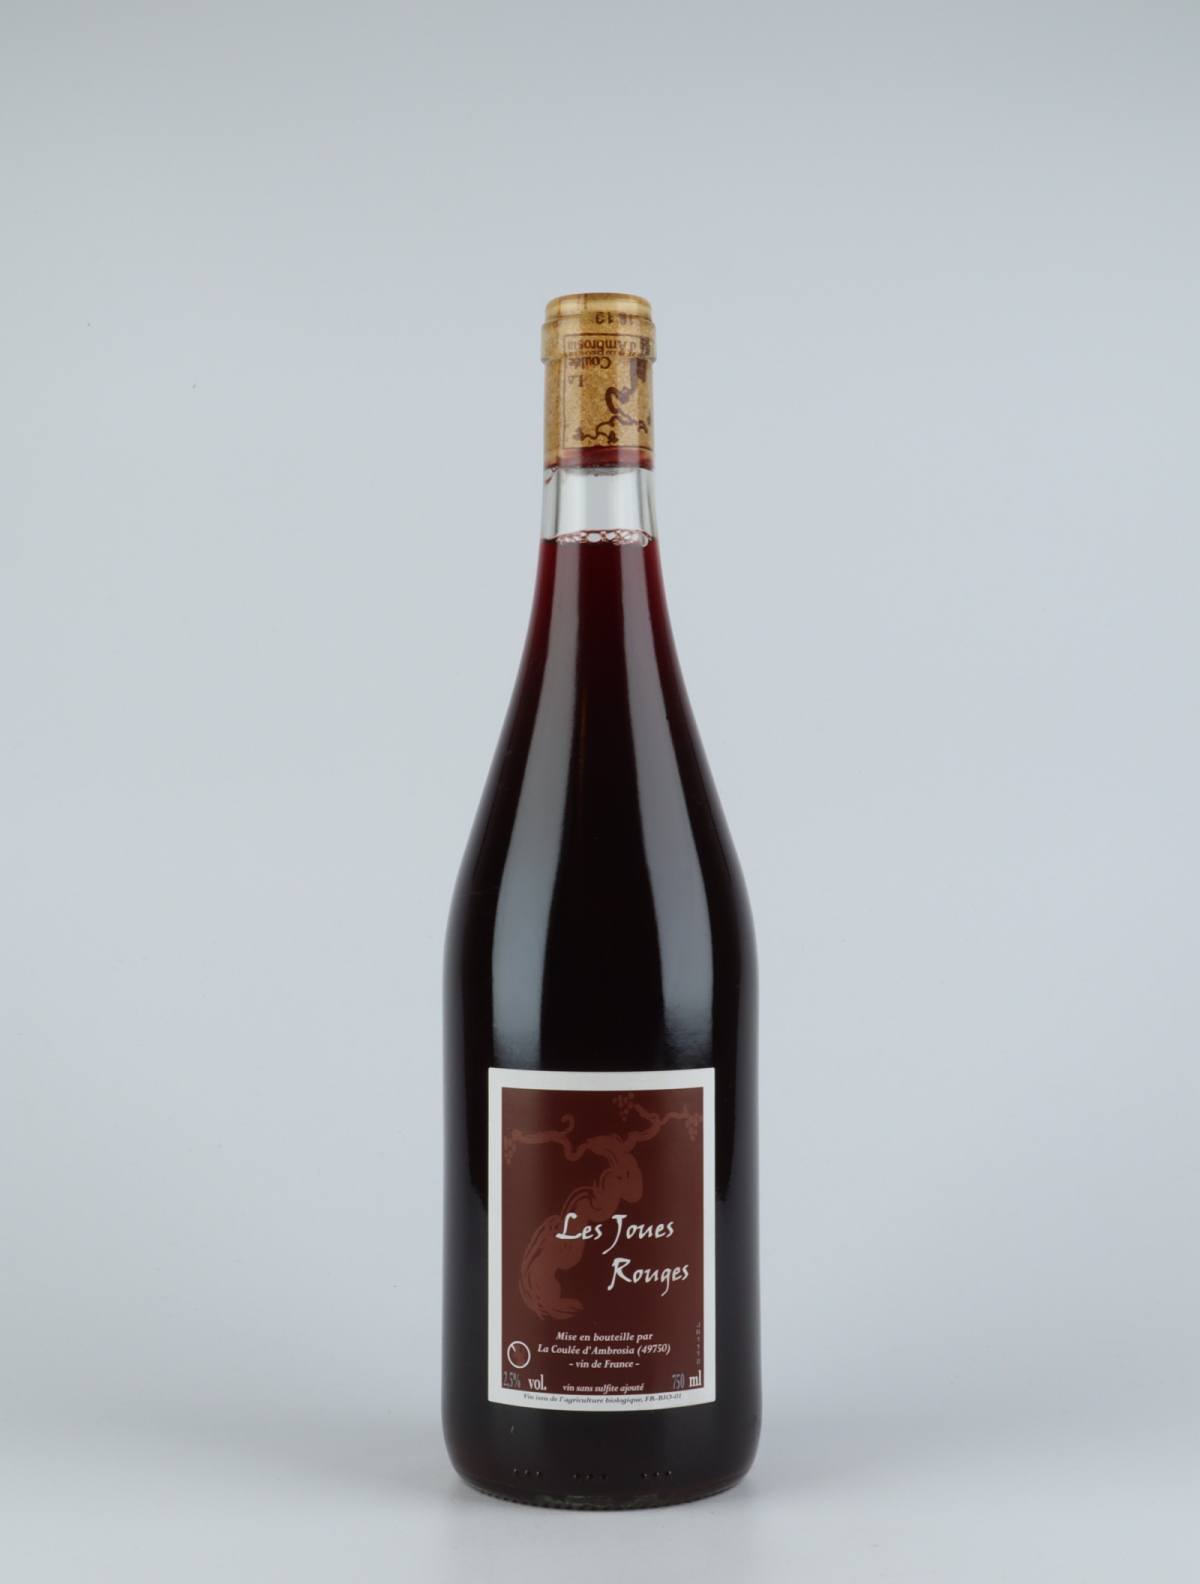 A bottle 2011 Les Joues Rouges Red wine from Jean-Francois Chene, Loire in France